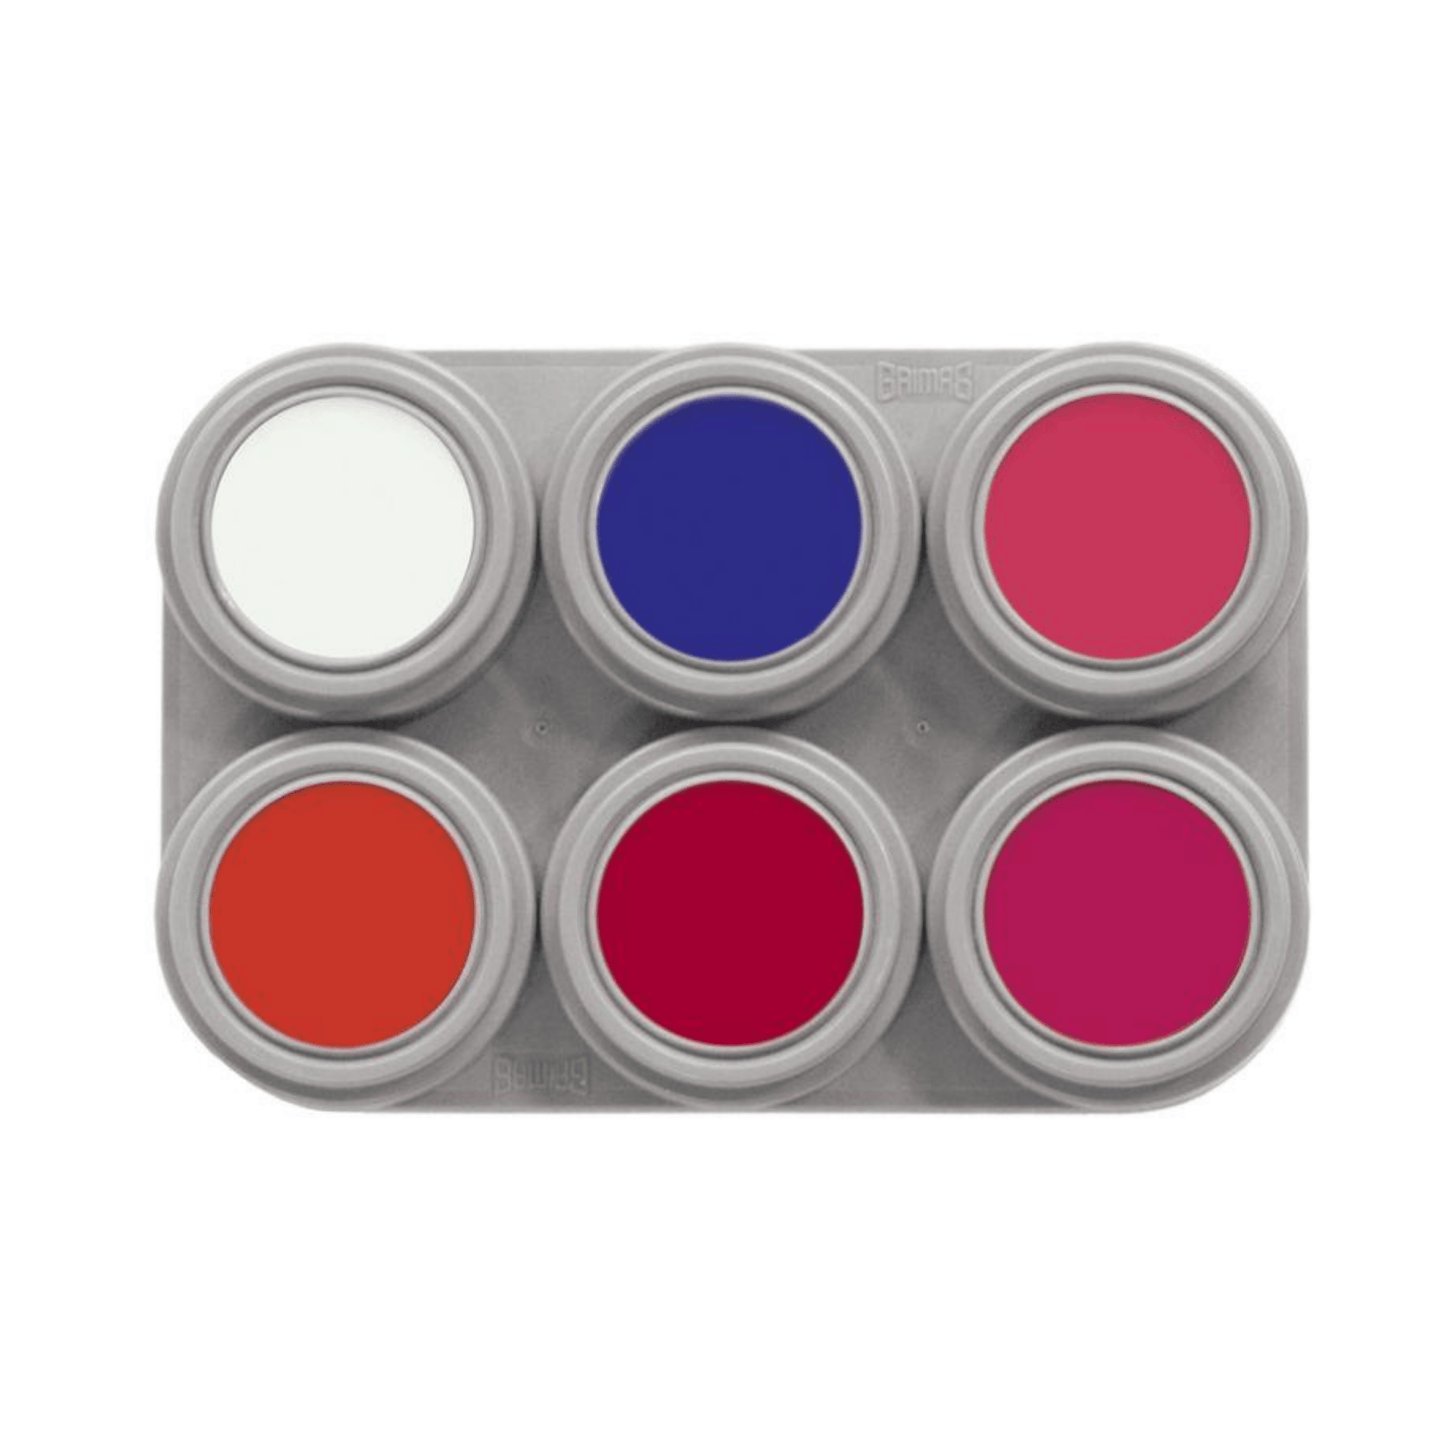 Water Make- up paletti Fluor, Grimas - Art Move Store Oy